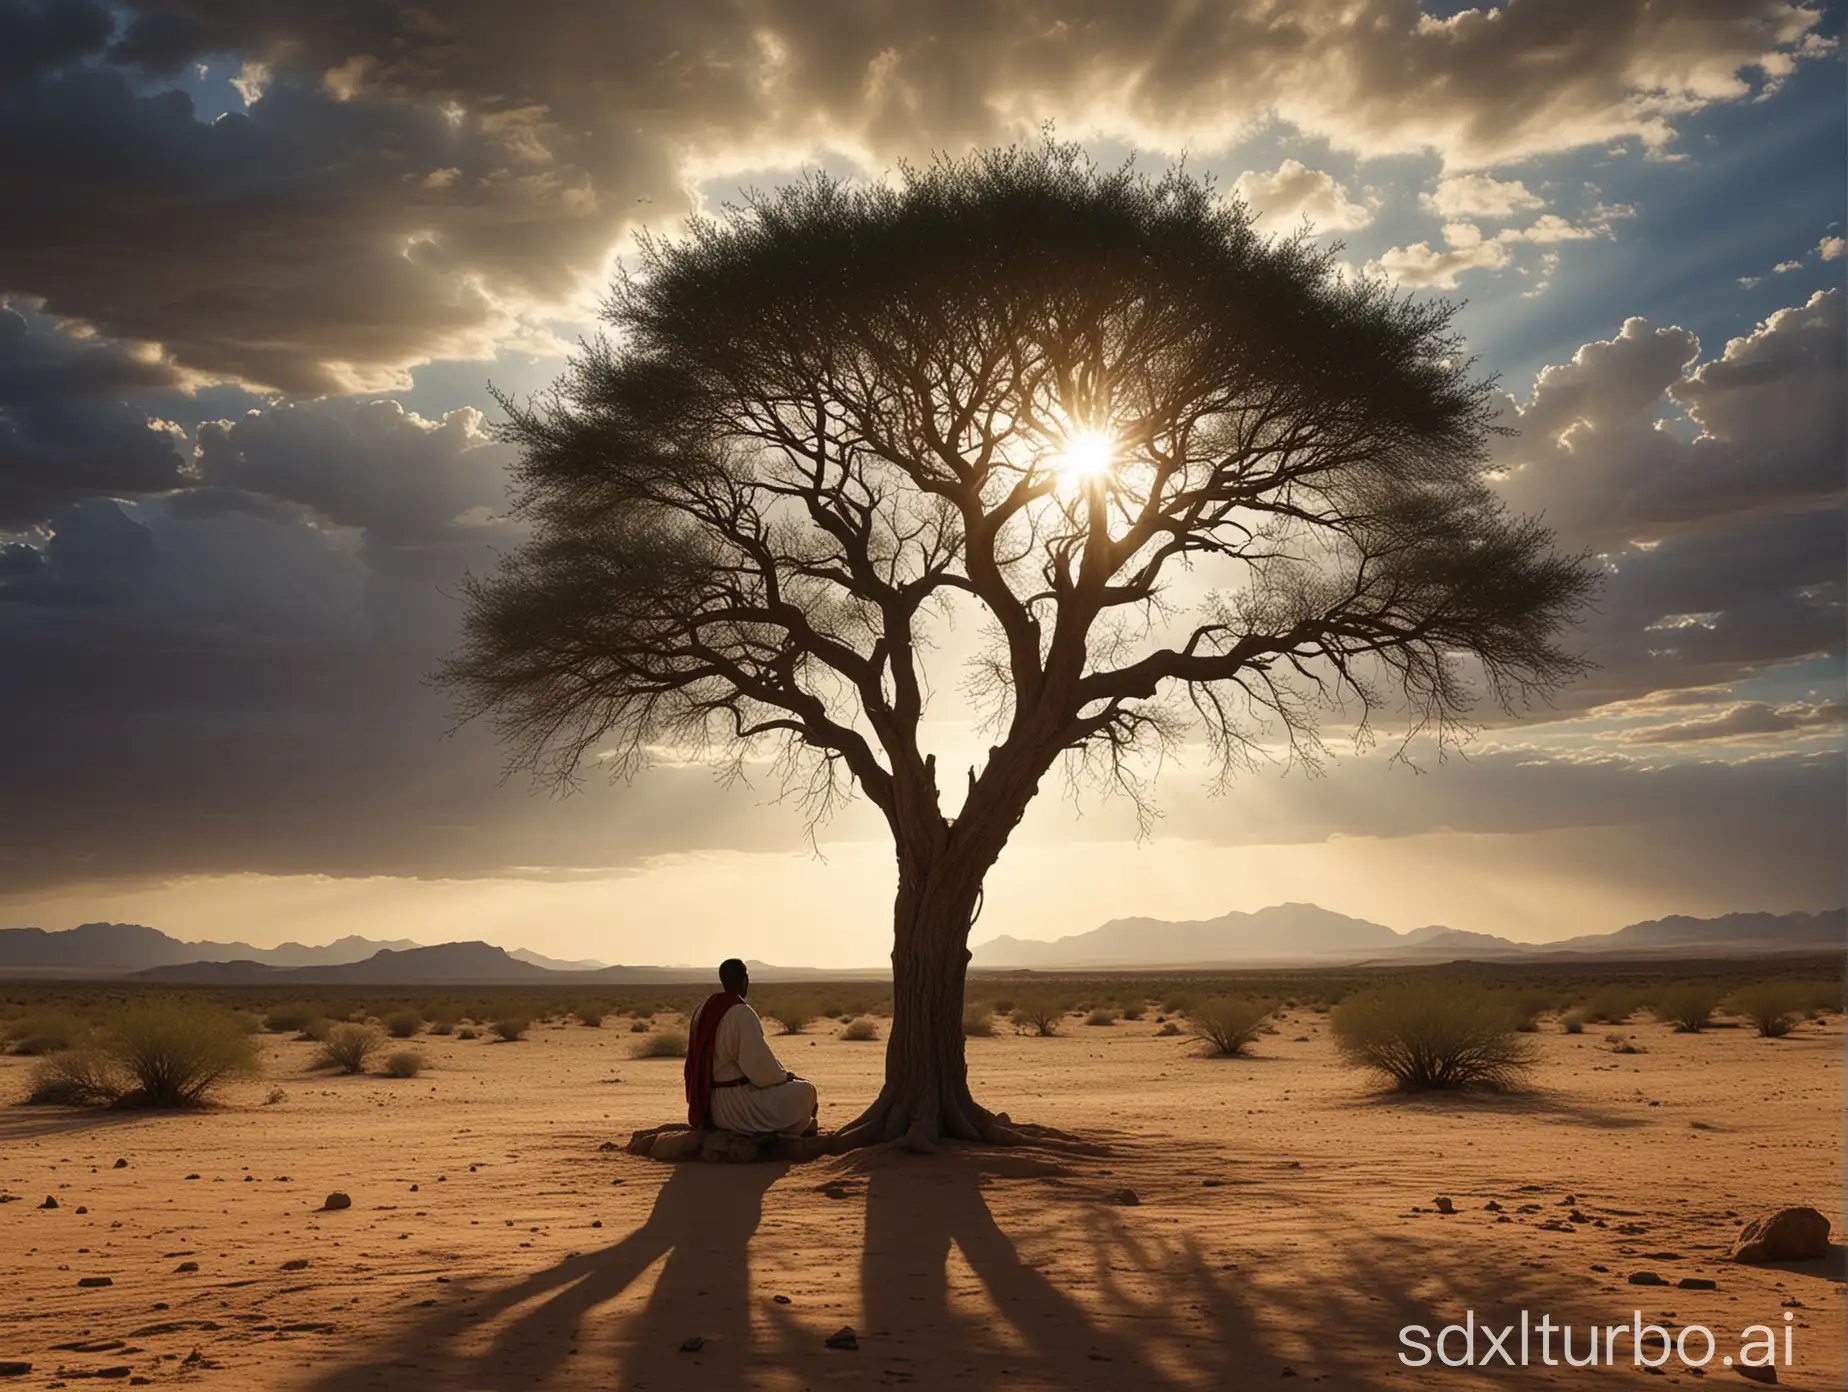 The image depicts a serene scene with a solitary tree in a desert landscape. A man dressed in biblical garb sits under the tree, suggesting a moment of rest or contemplation. The dramatic sky, with its mix of clouds and breaking sunlight, adds a sense of calm and introspection to the scene. The soft light filtering through the tree branches creates a peaceful atmosphere. The use of light and shadow enhances the contemplative atmosphere, making it a striking and stimulating work of art.